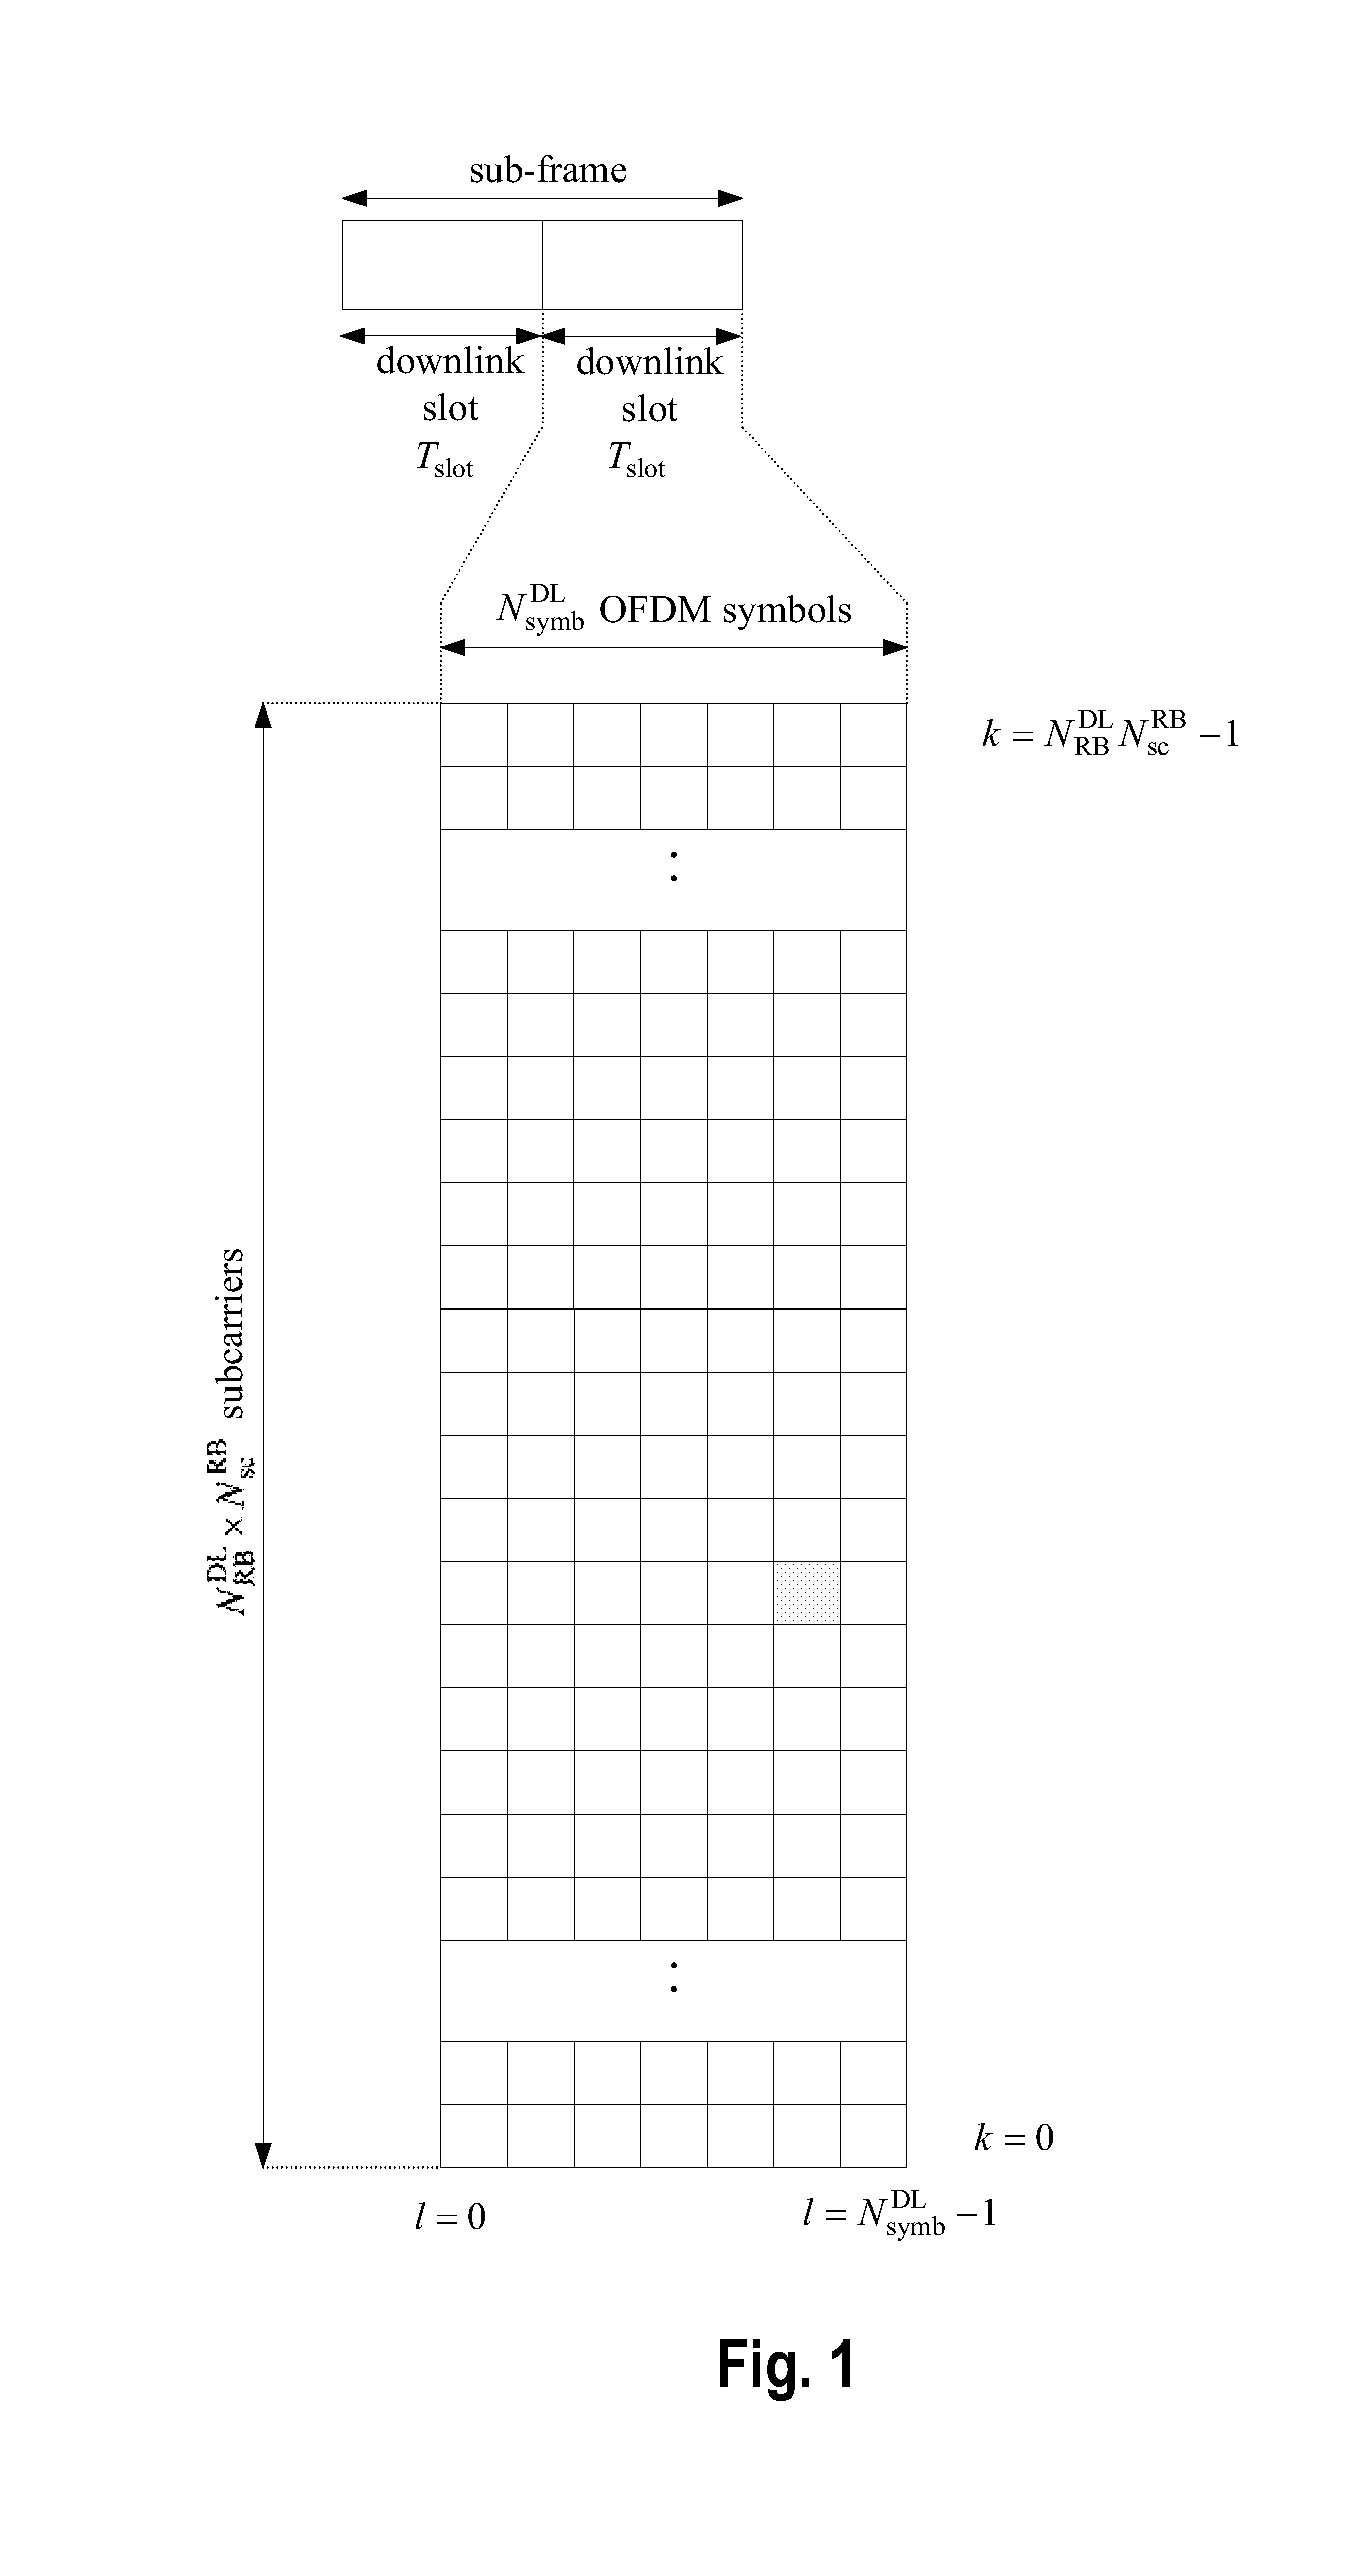 Configuration of uplink and downlink grant search spaces in an ofdm-based mobile communication system